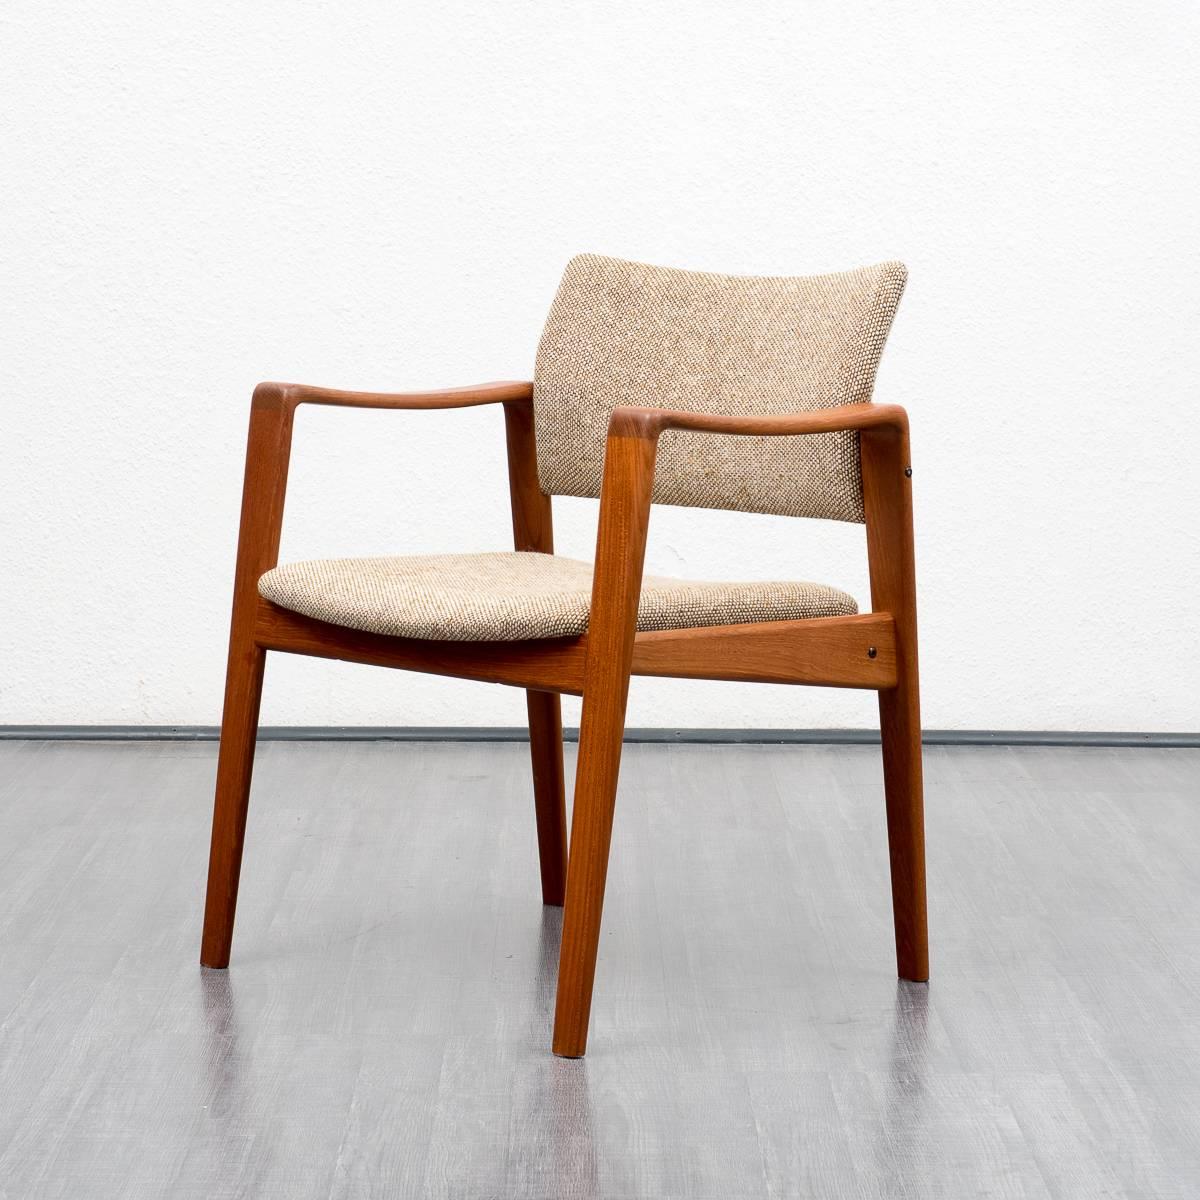 Mid-20th Century Big 1960s Chair with Armrests by Komfort, Made in Denmark For Sale